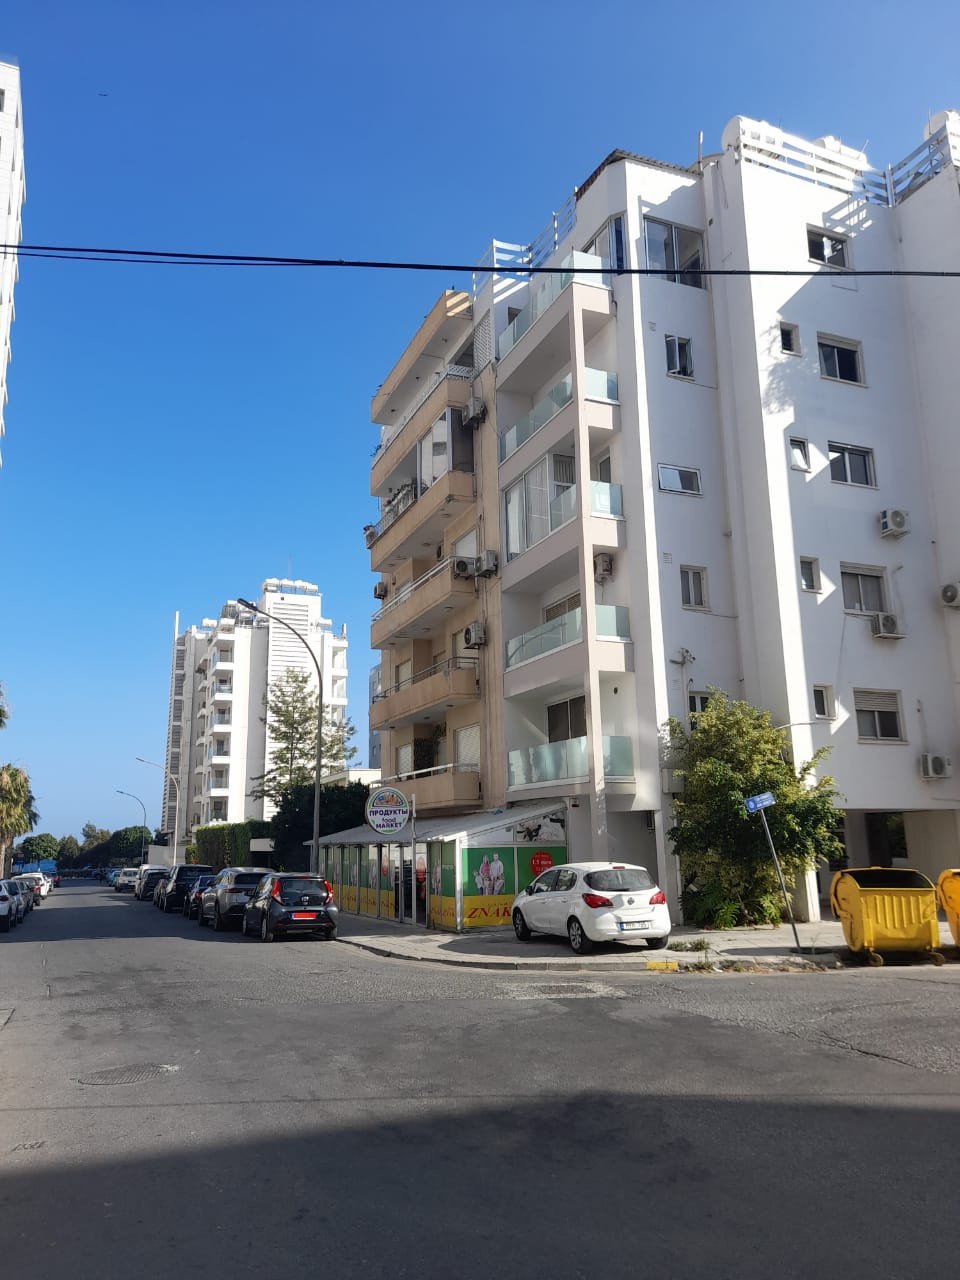 Property for Sale: Apartment (Flat) in Molos Area, Limassol  | Key Realtor Cyprus